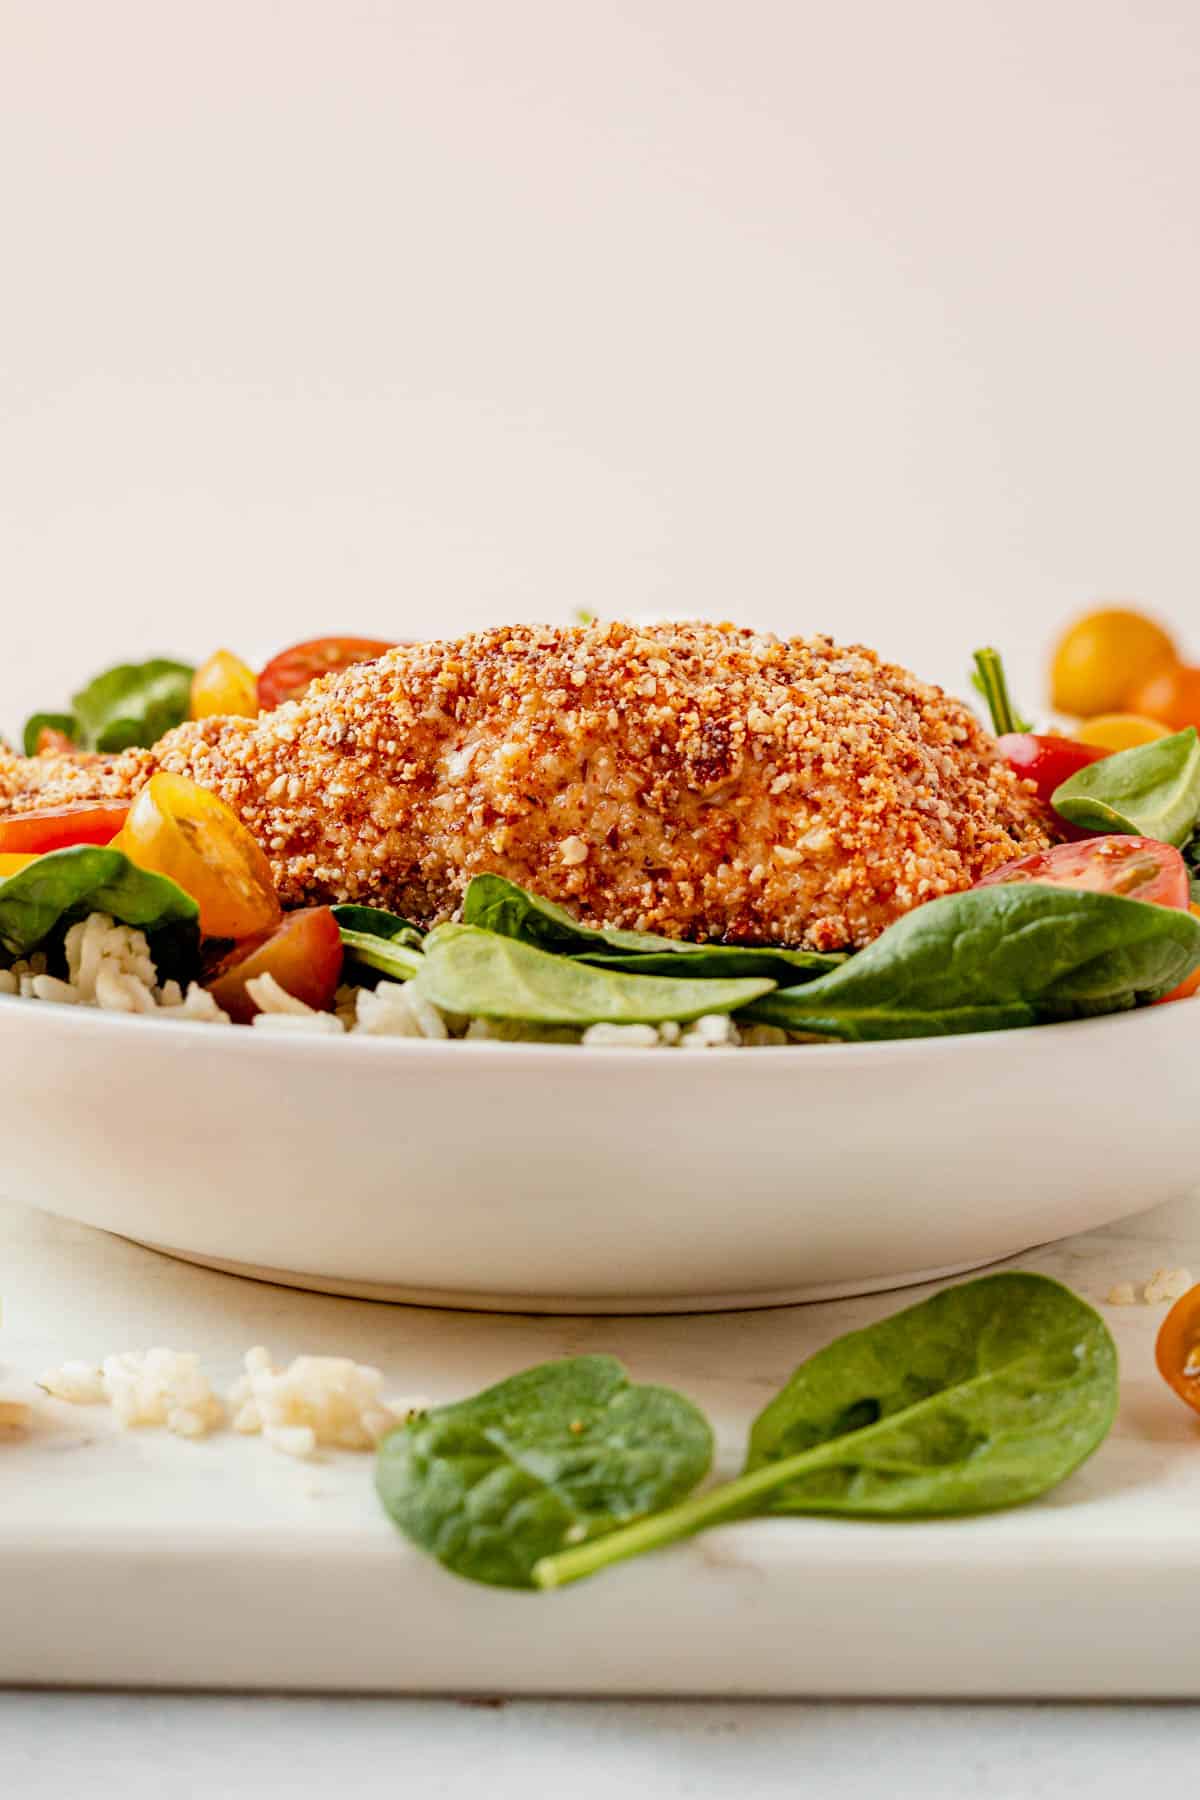 almond crusted salmon on rice and greens